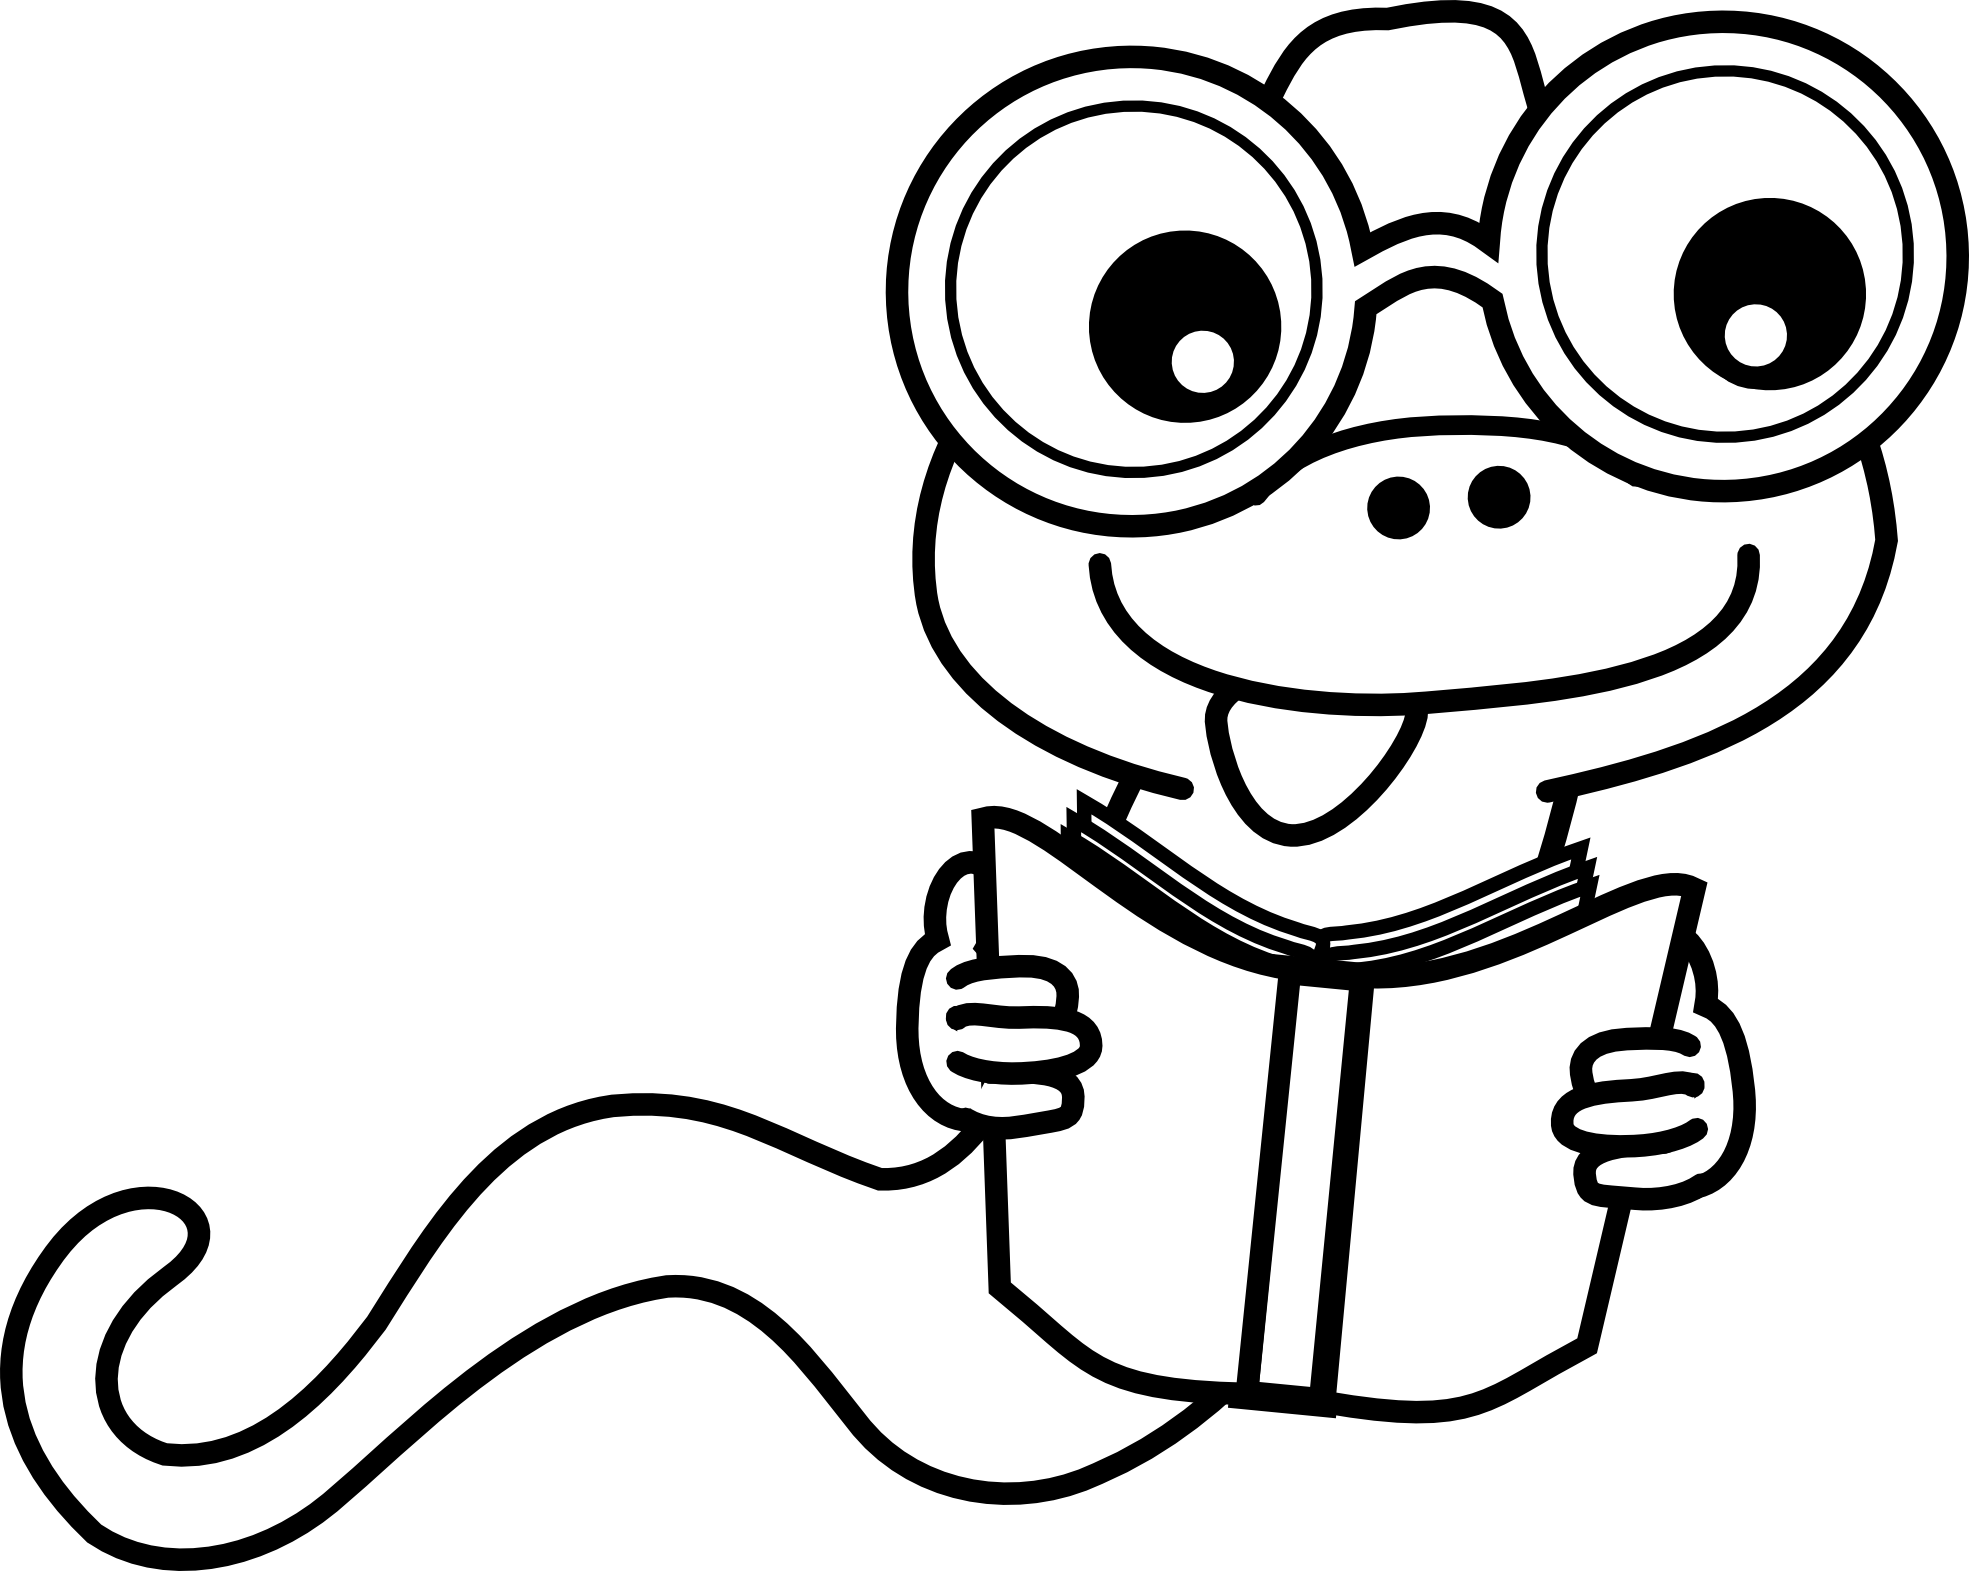 Bookworm Clip Art Black And White | Clipart library - Free Clipart 